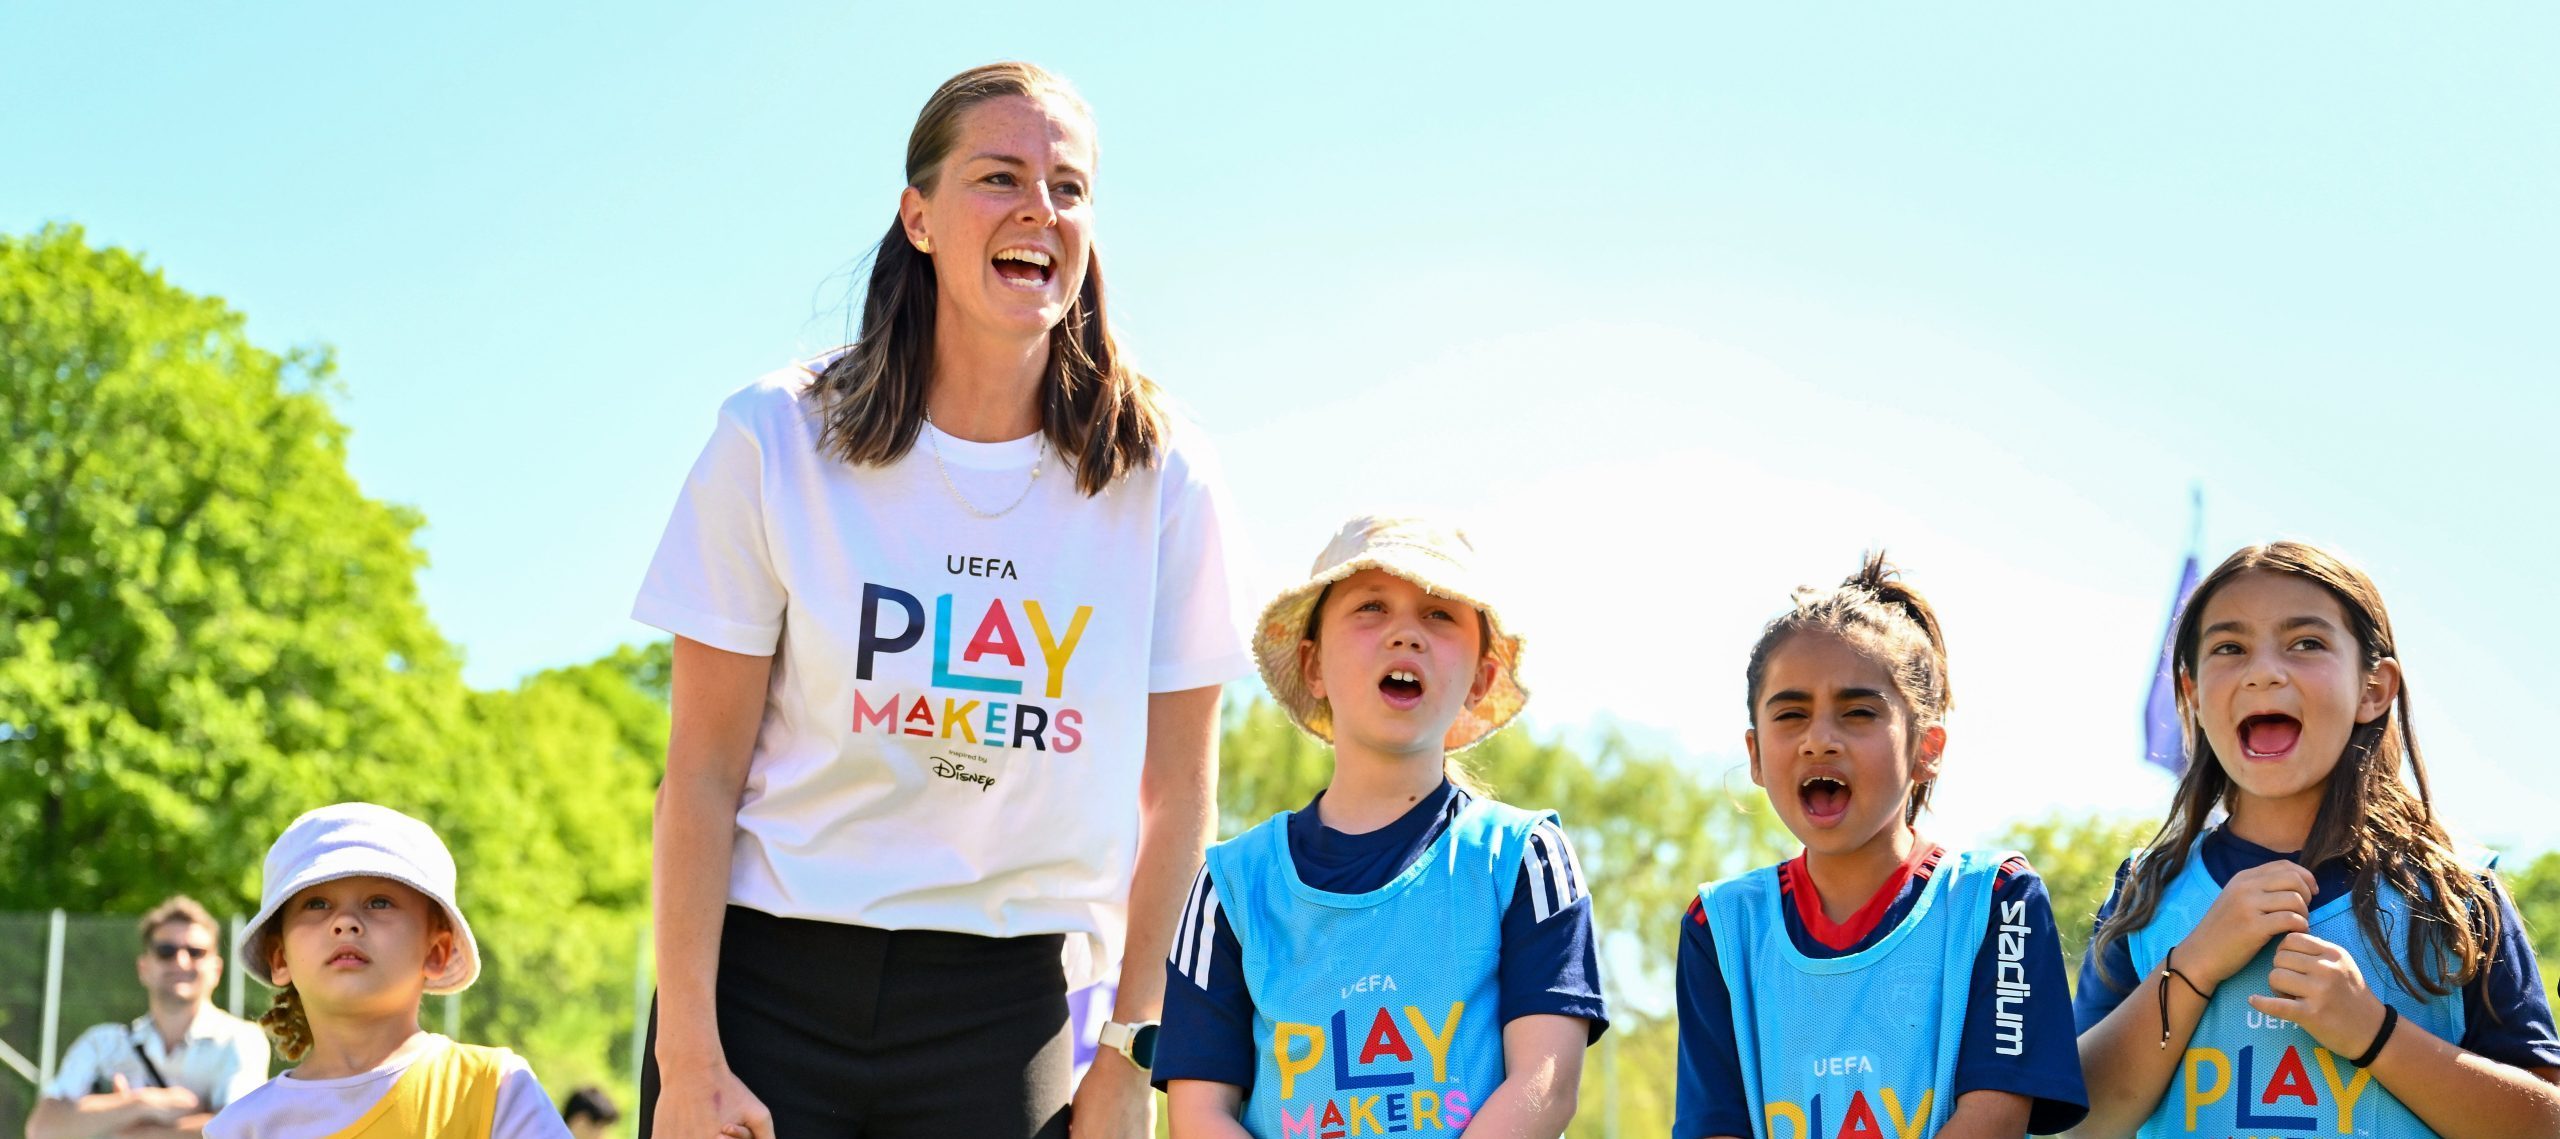 Disney and UEFA invite Swedish footballer Lotta Schelin to be first-ever UEFA Playmakers Ambassador